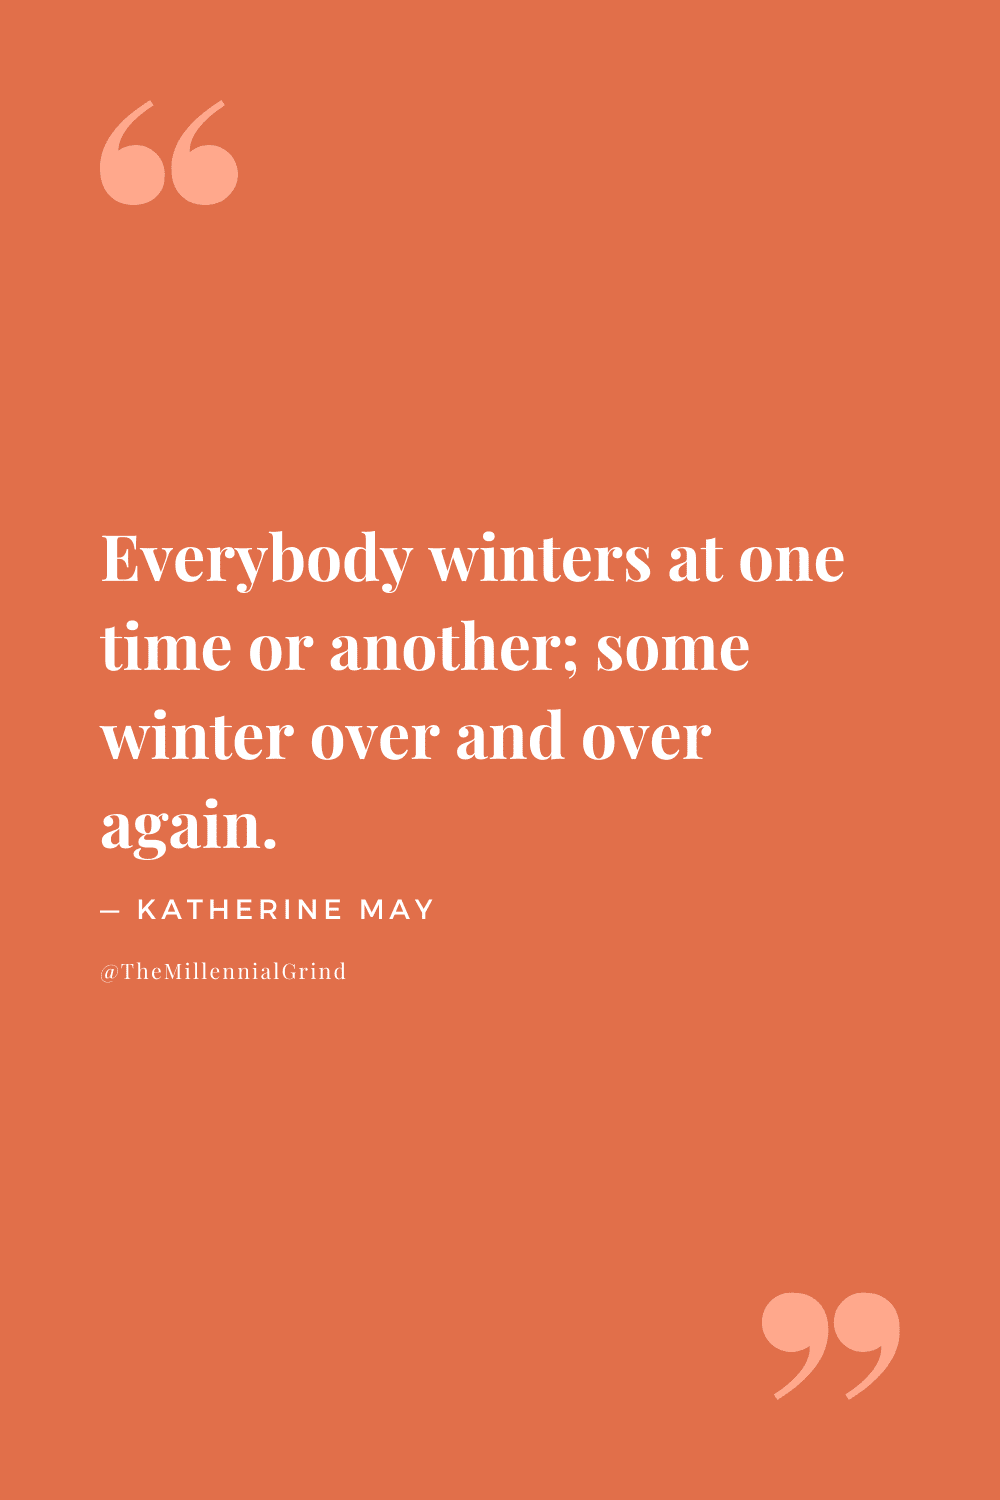 Quotes From Wintering by Katherine May